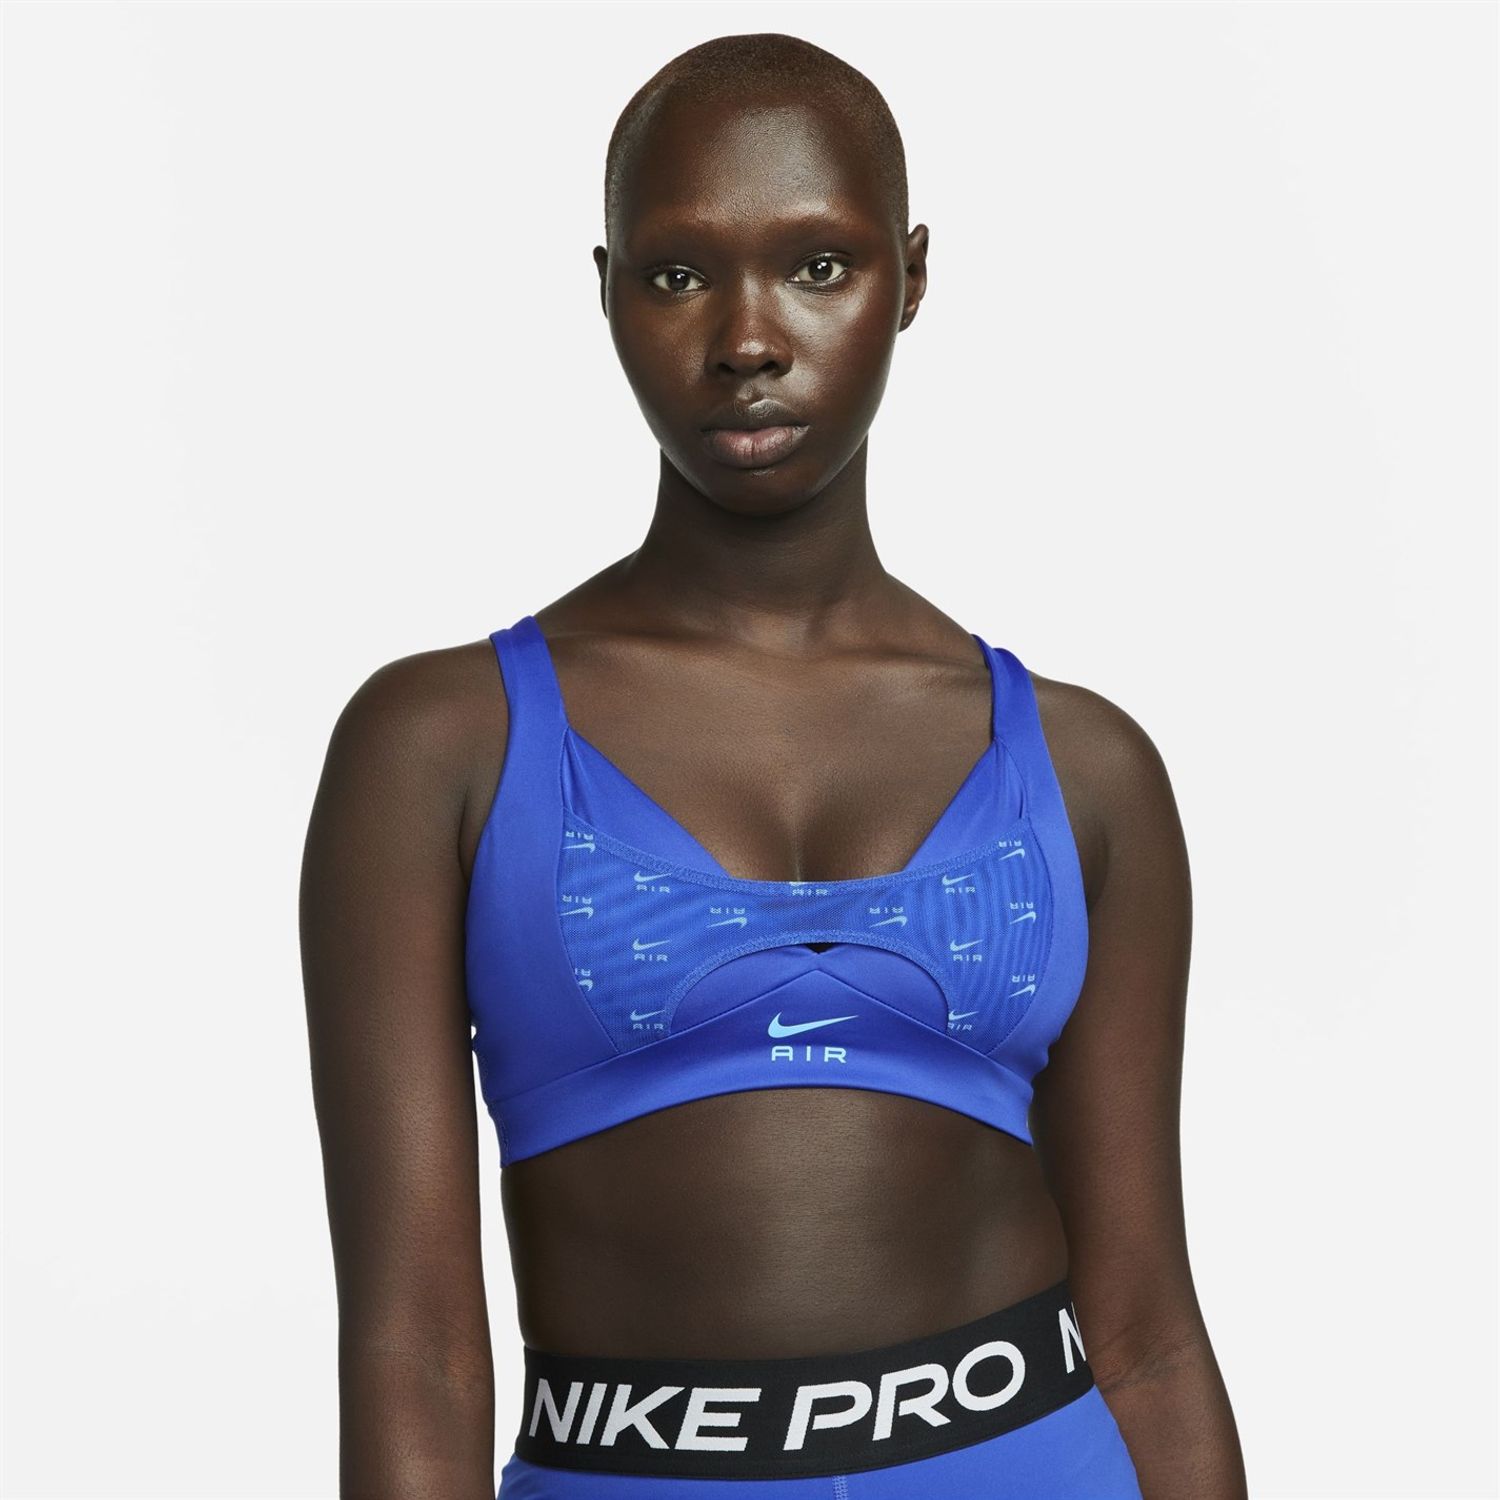 7 Sports Bra You'll Want To Show Off